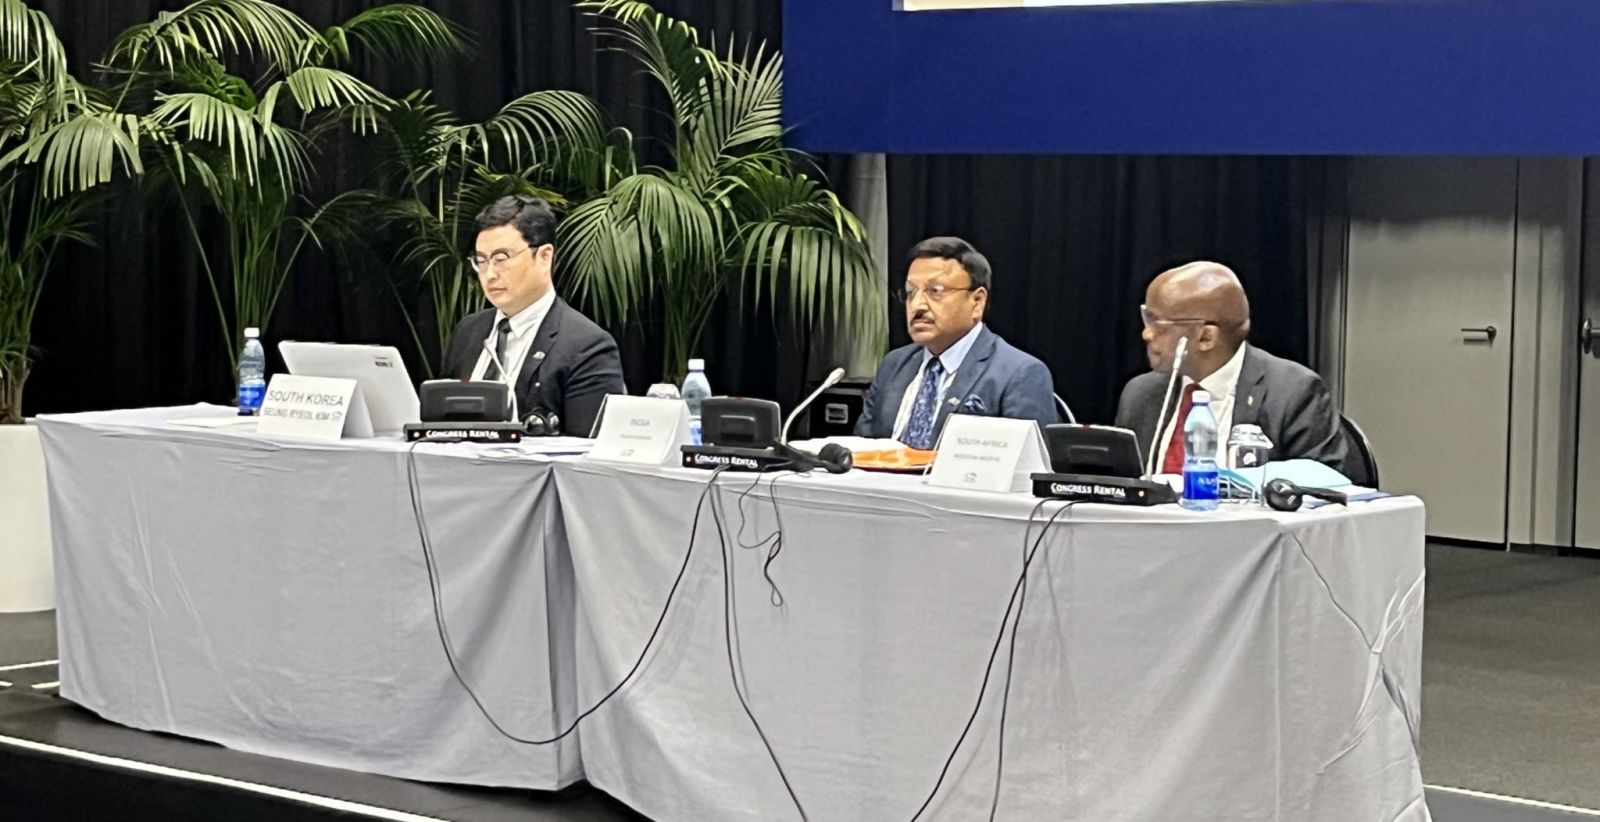 CEC Shri Rajiv Kumar chaired Extraordinary meeting of the Executive Board of the Association of World Election Bodies at Capetown, South Africa on 18th October,2022.